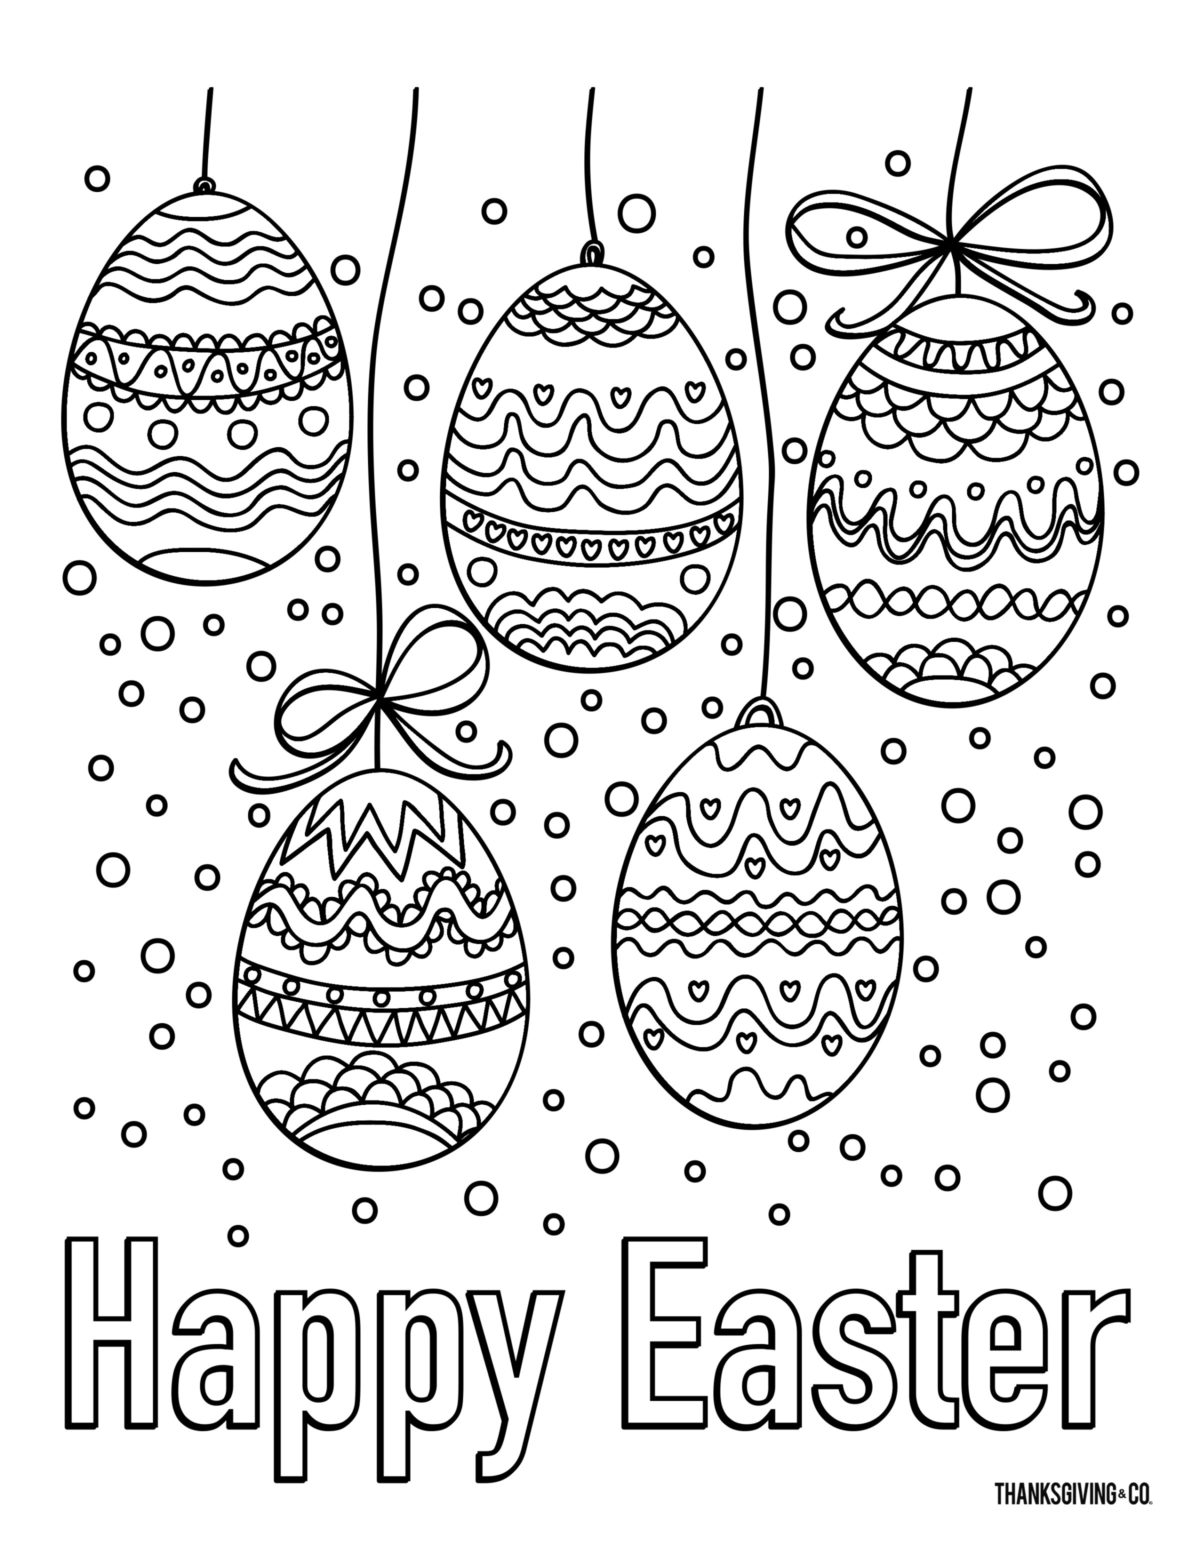 5 Free Printable Easter Coloring Pages For Adults That Will Relieve Holiday Stress